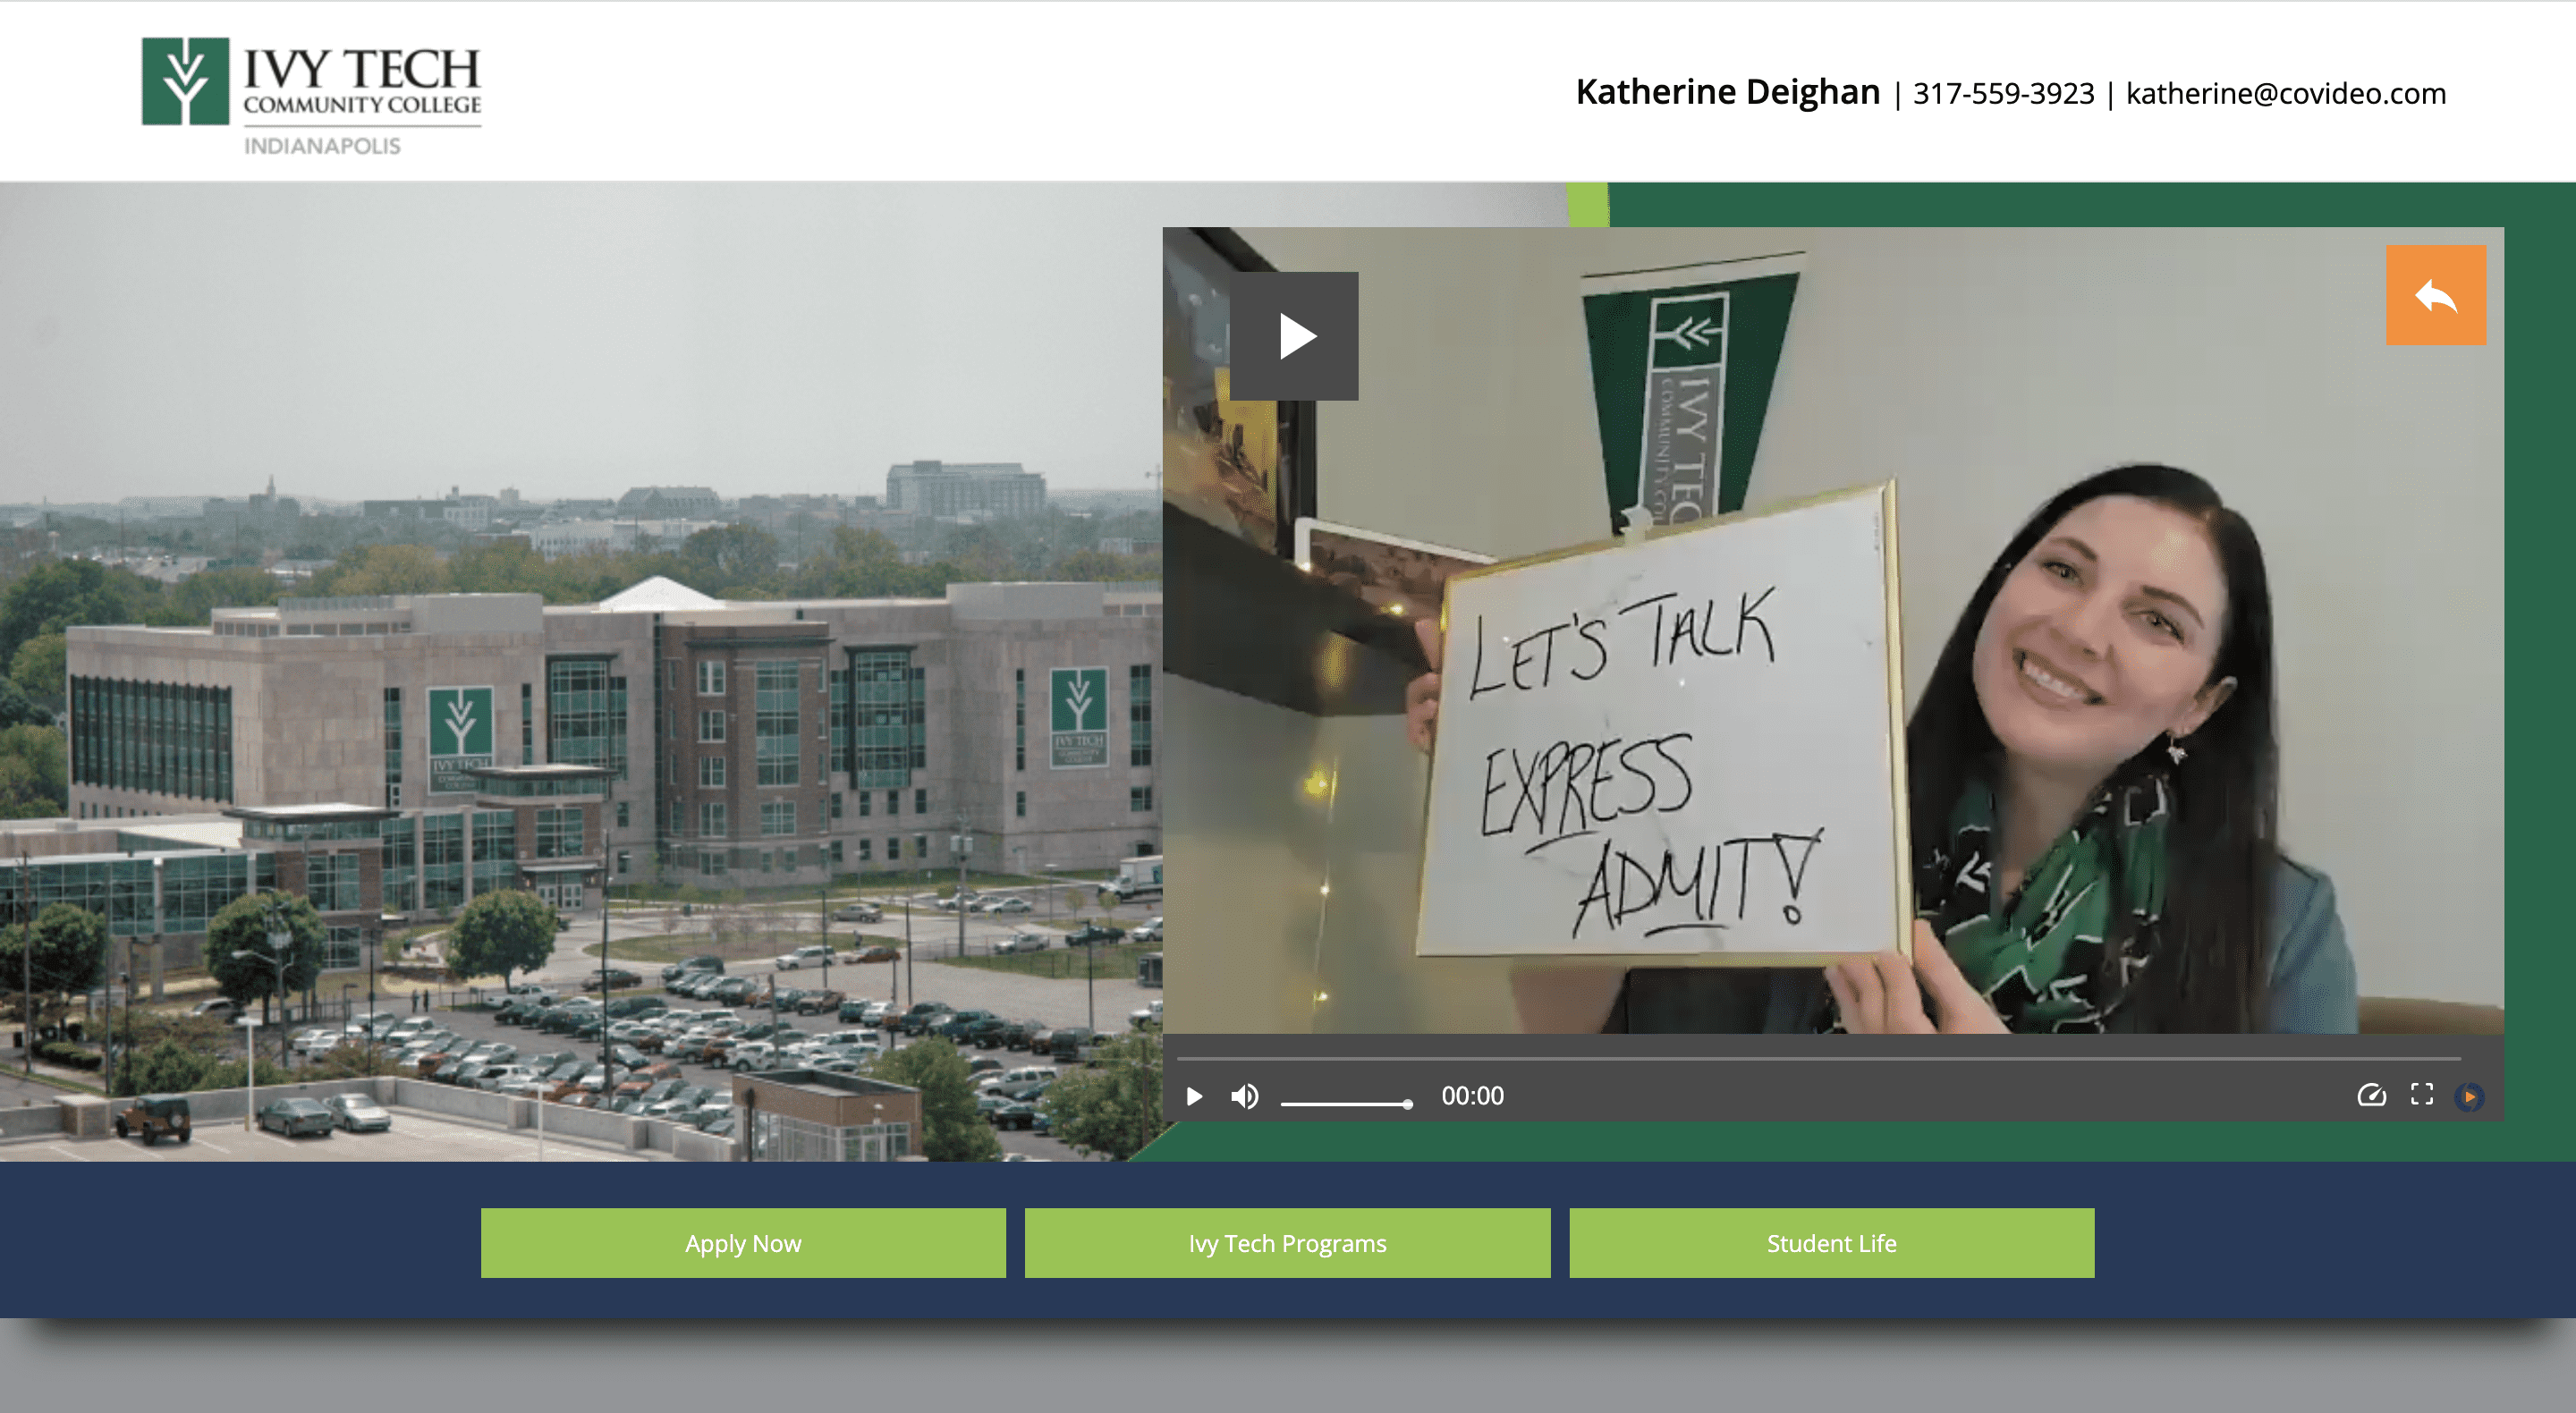 video landing page ivy tech community college woman holding up whiteboard for admissions express admit